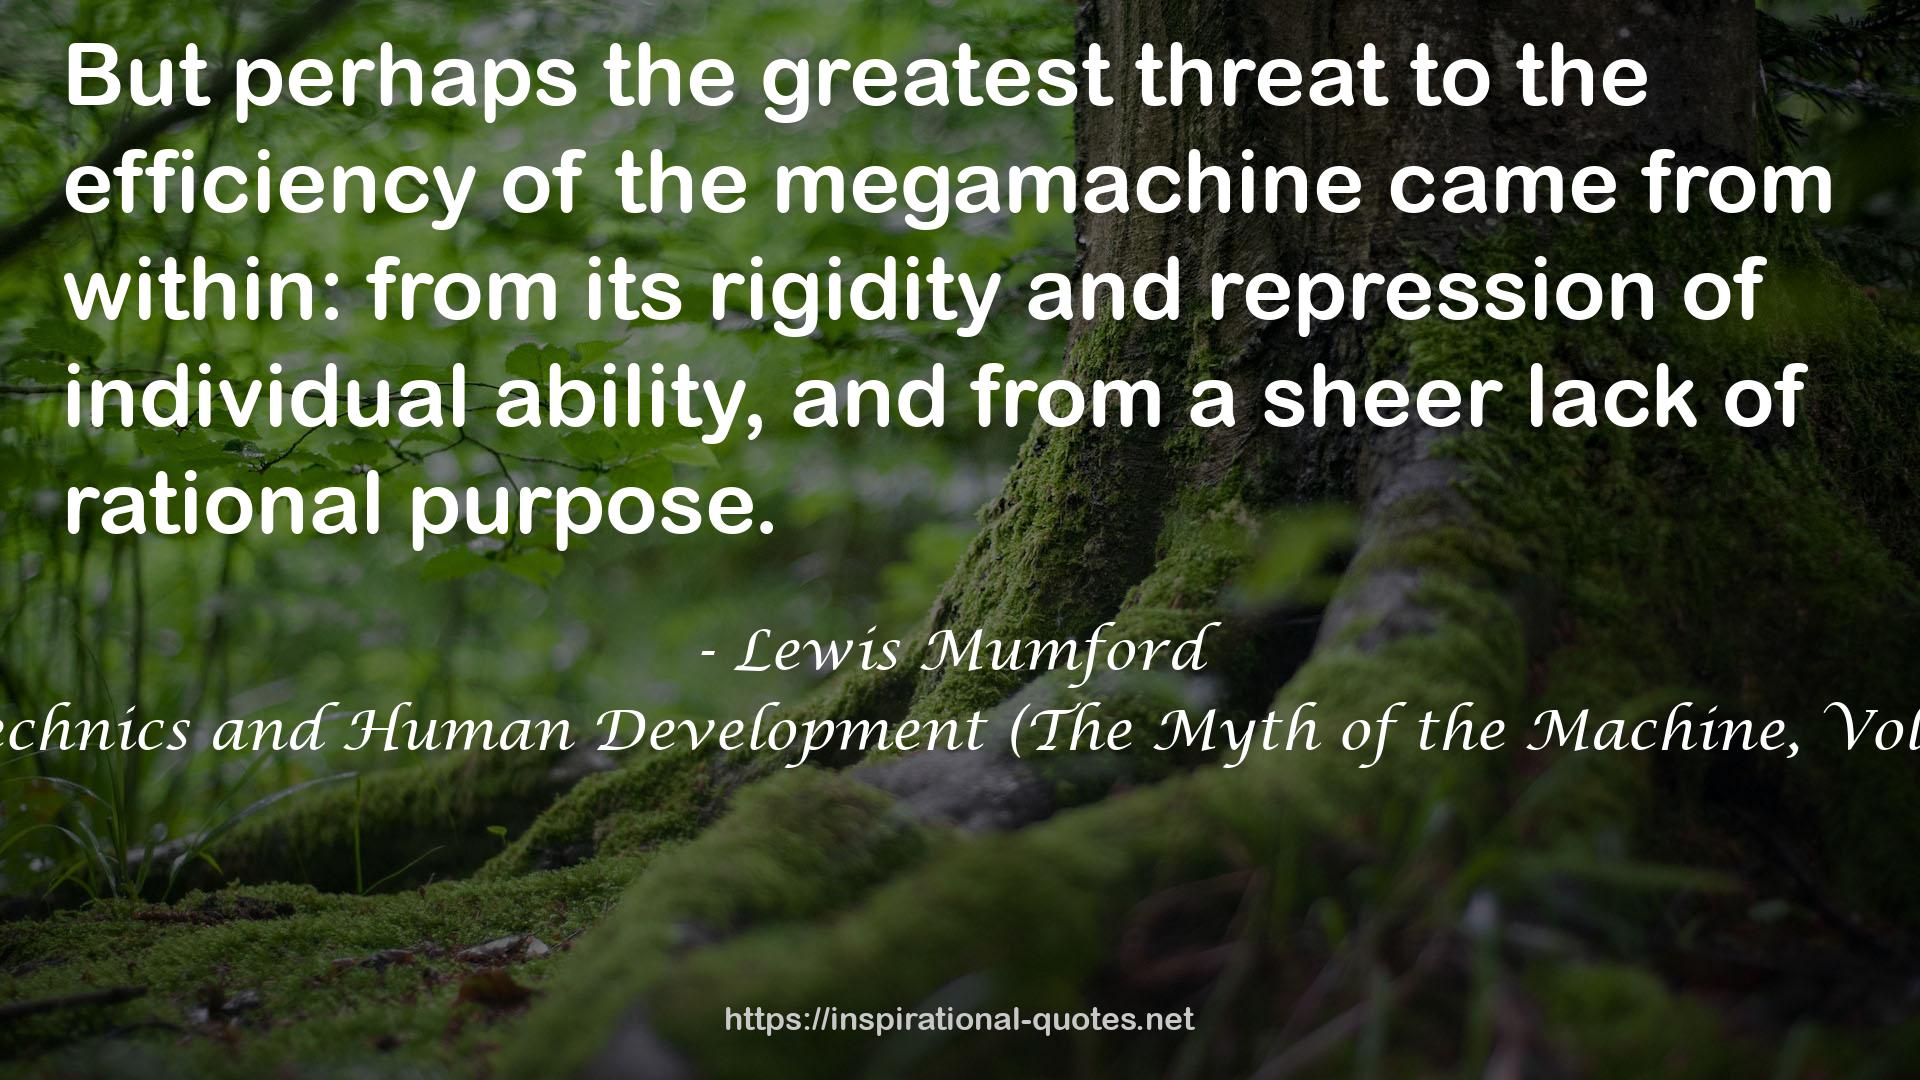 Technics and Human Development (The Myth of the Machine, Vol 1) QUOTES